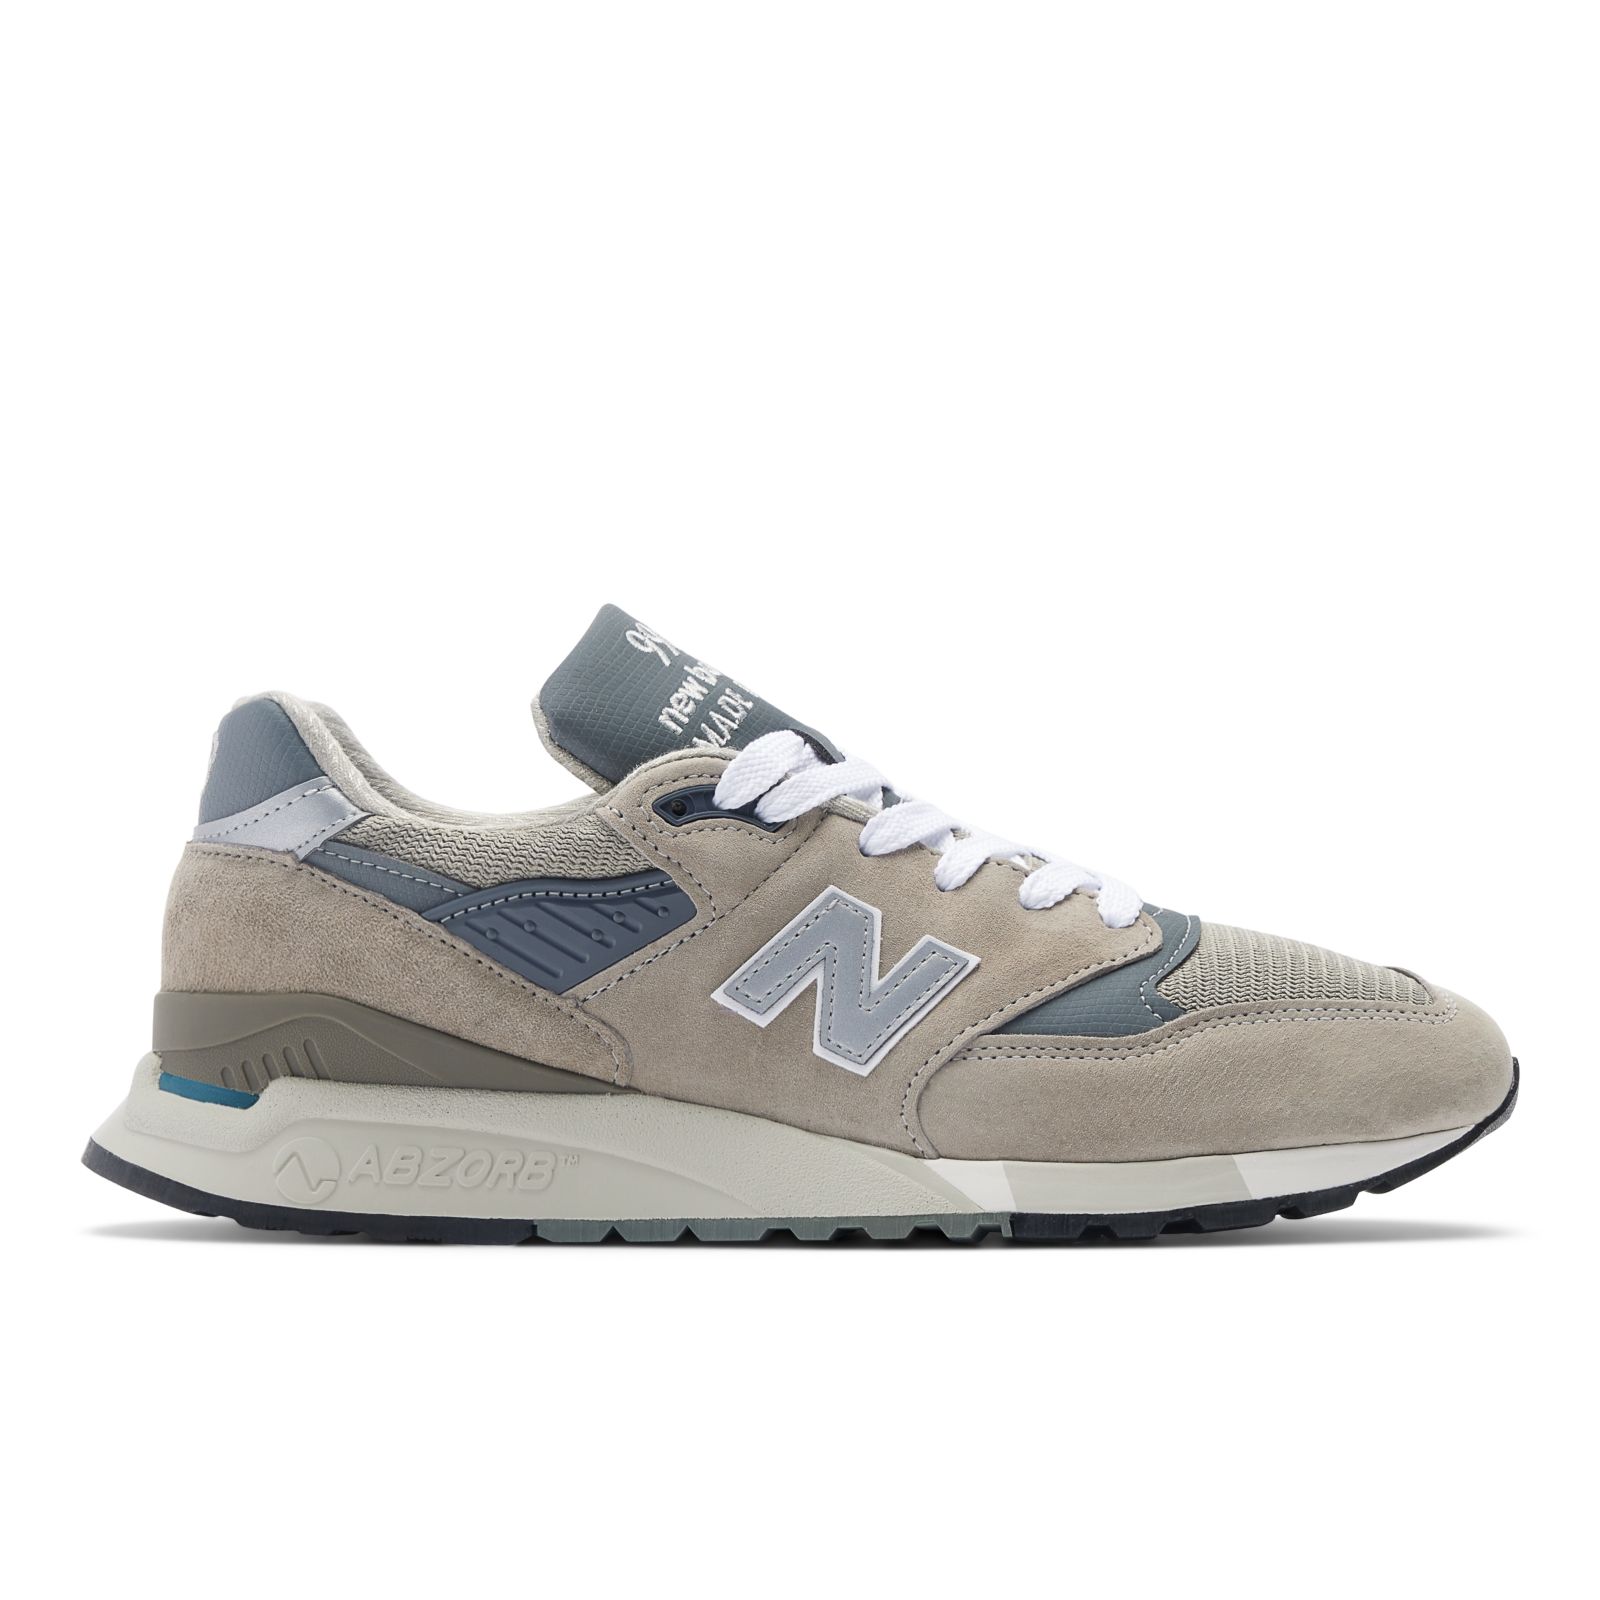 NEW BALANCE M998 Made in USA GRAY US10.0-